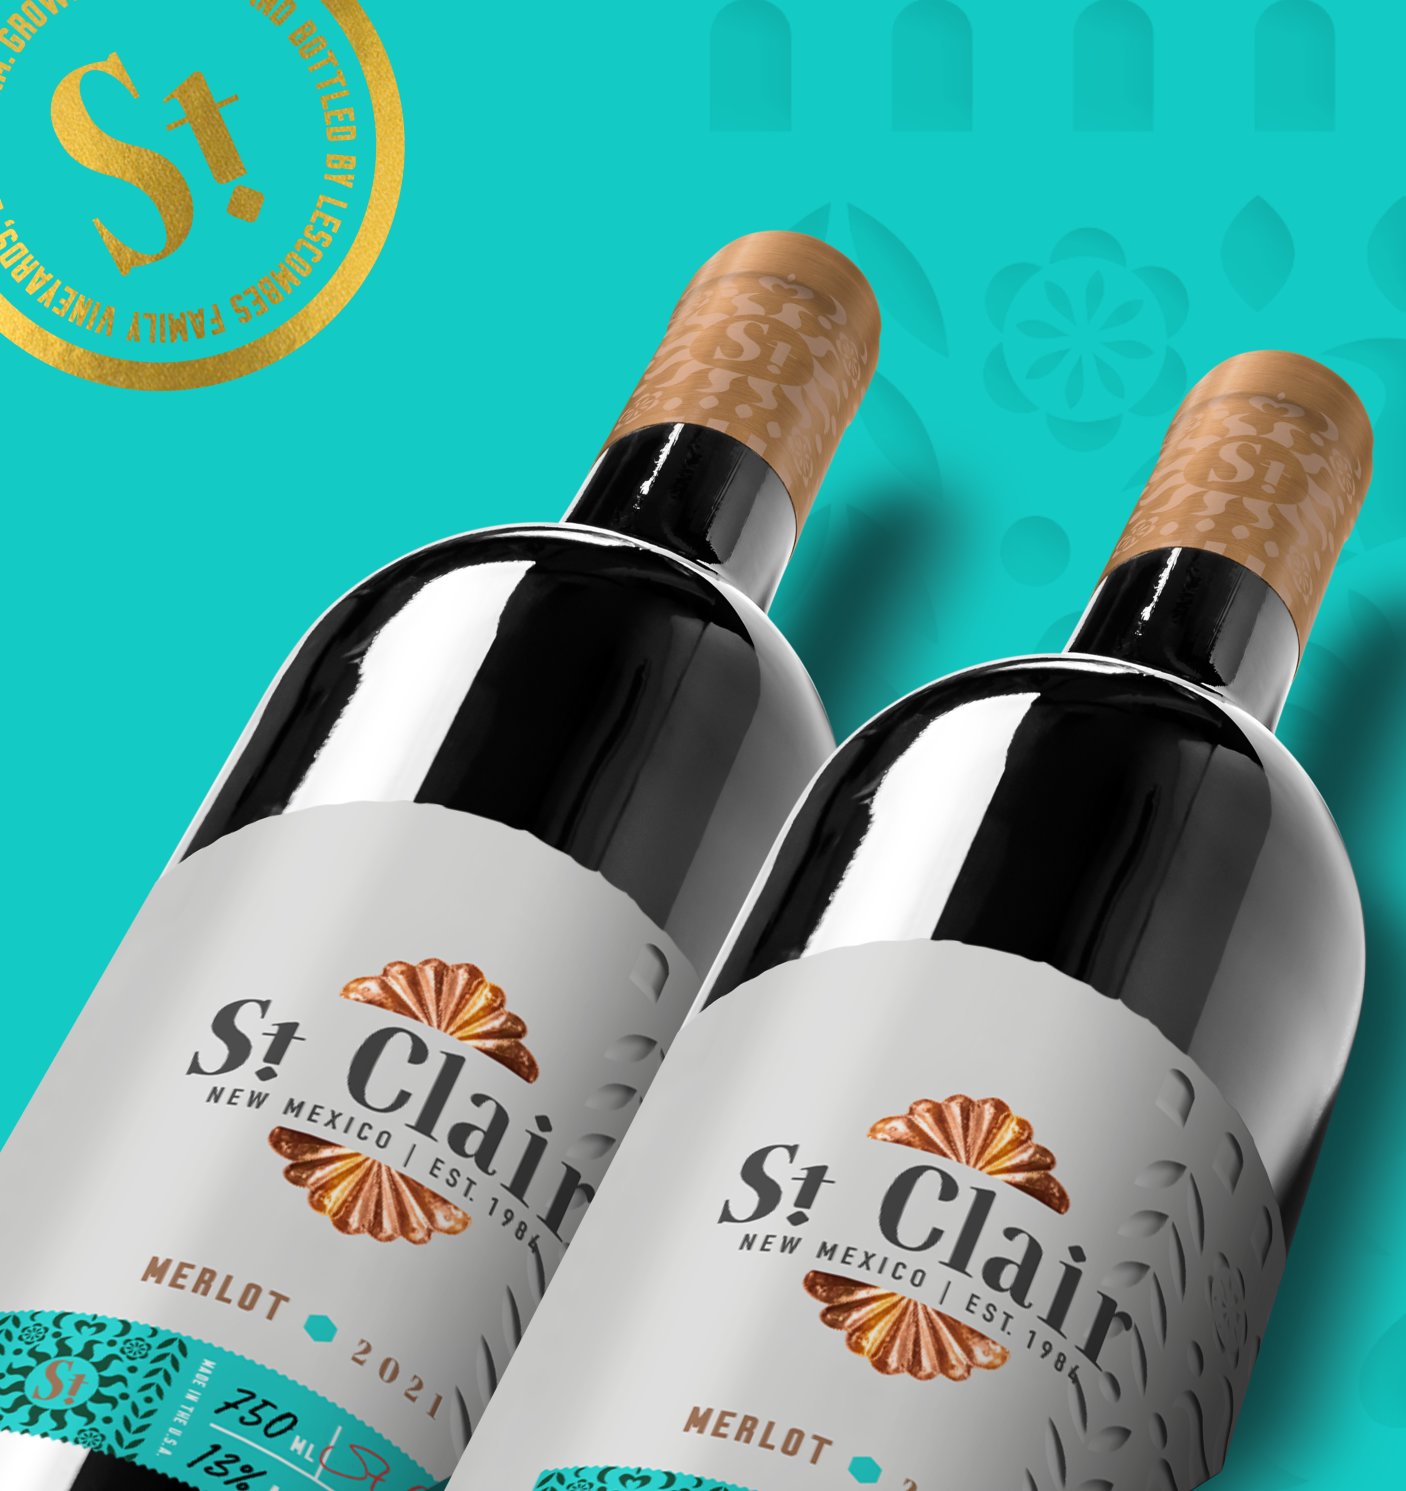 St. Clair will unveil a new label at 2022 New Mexico Wine Festival